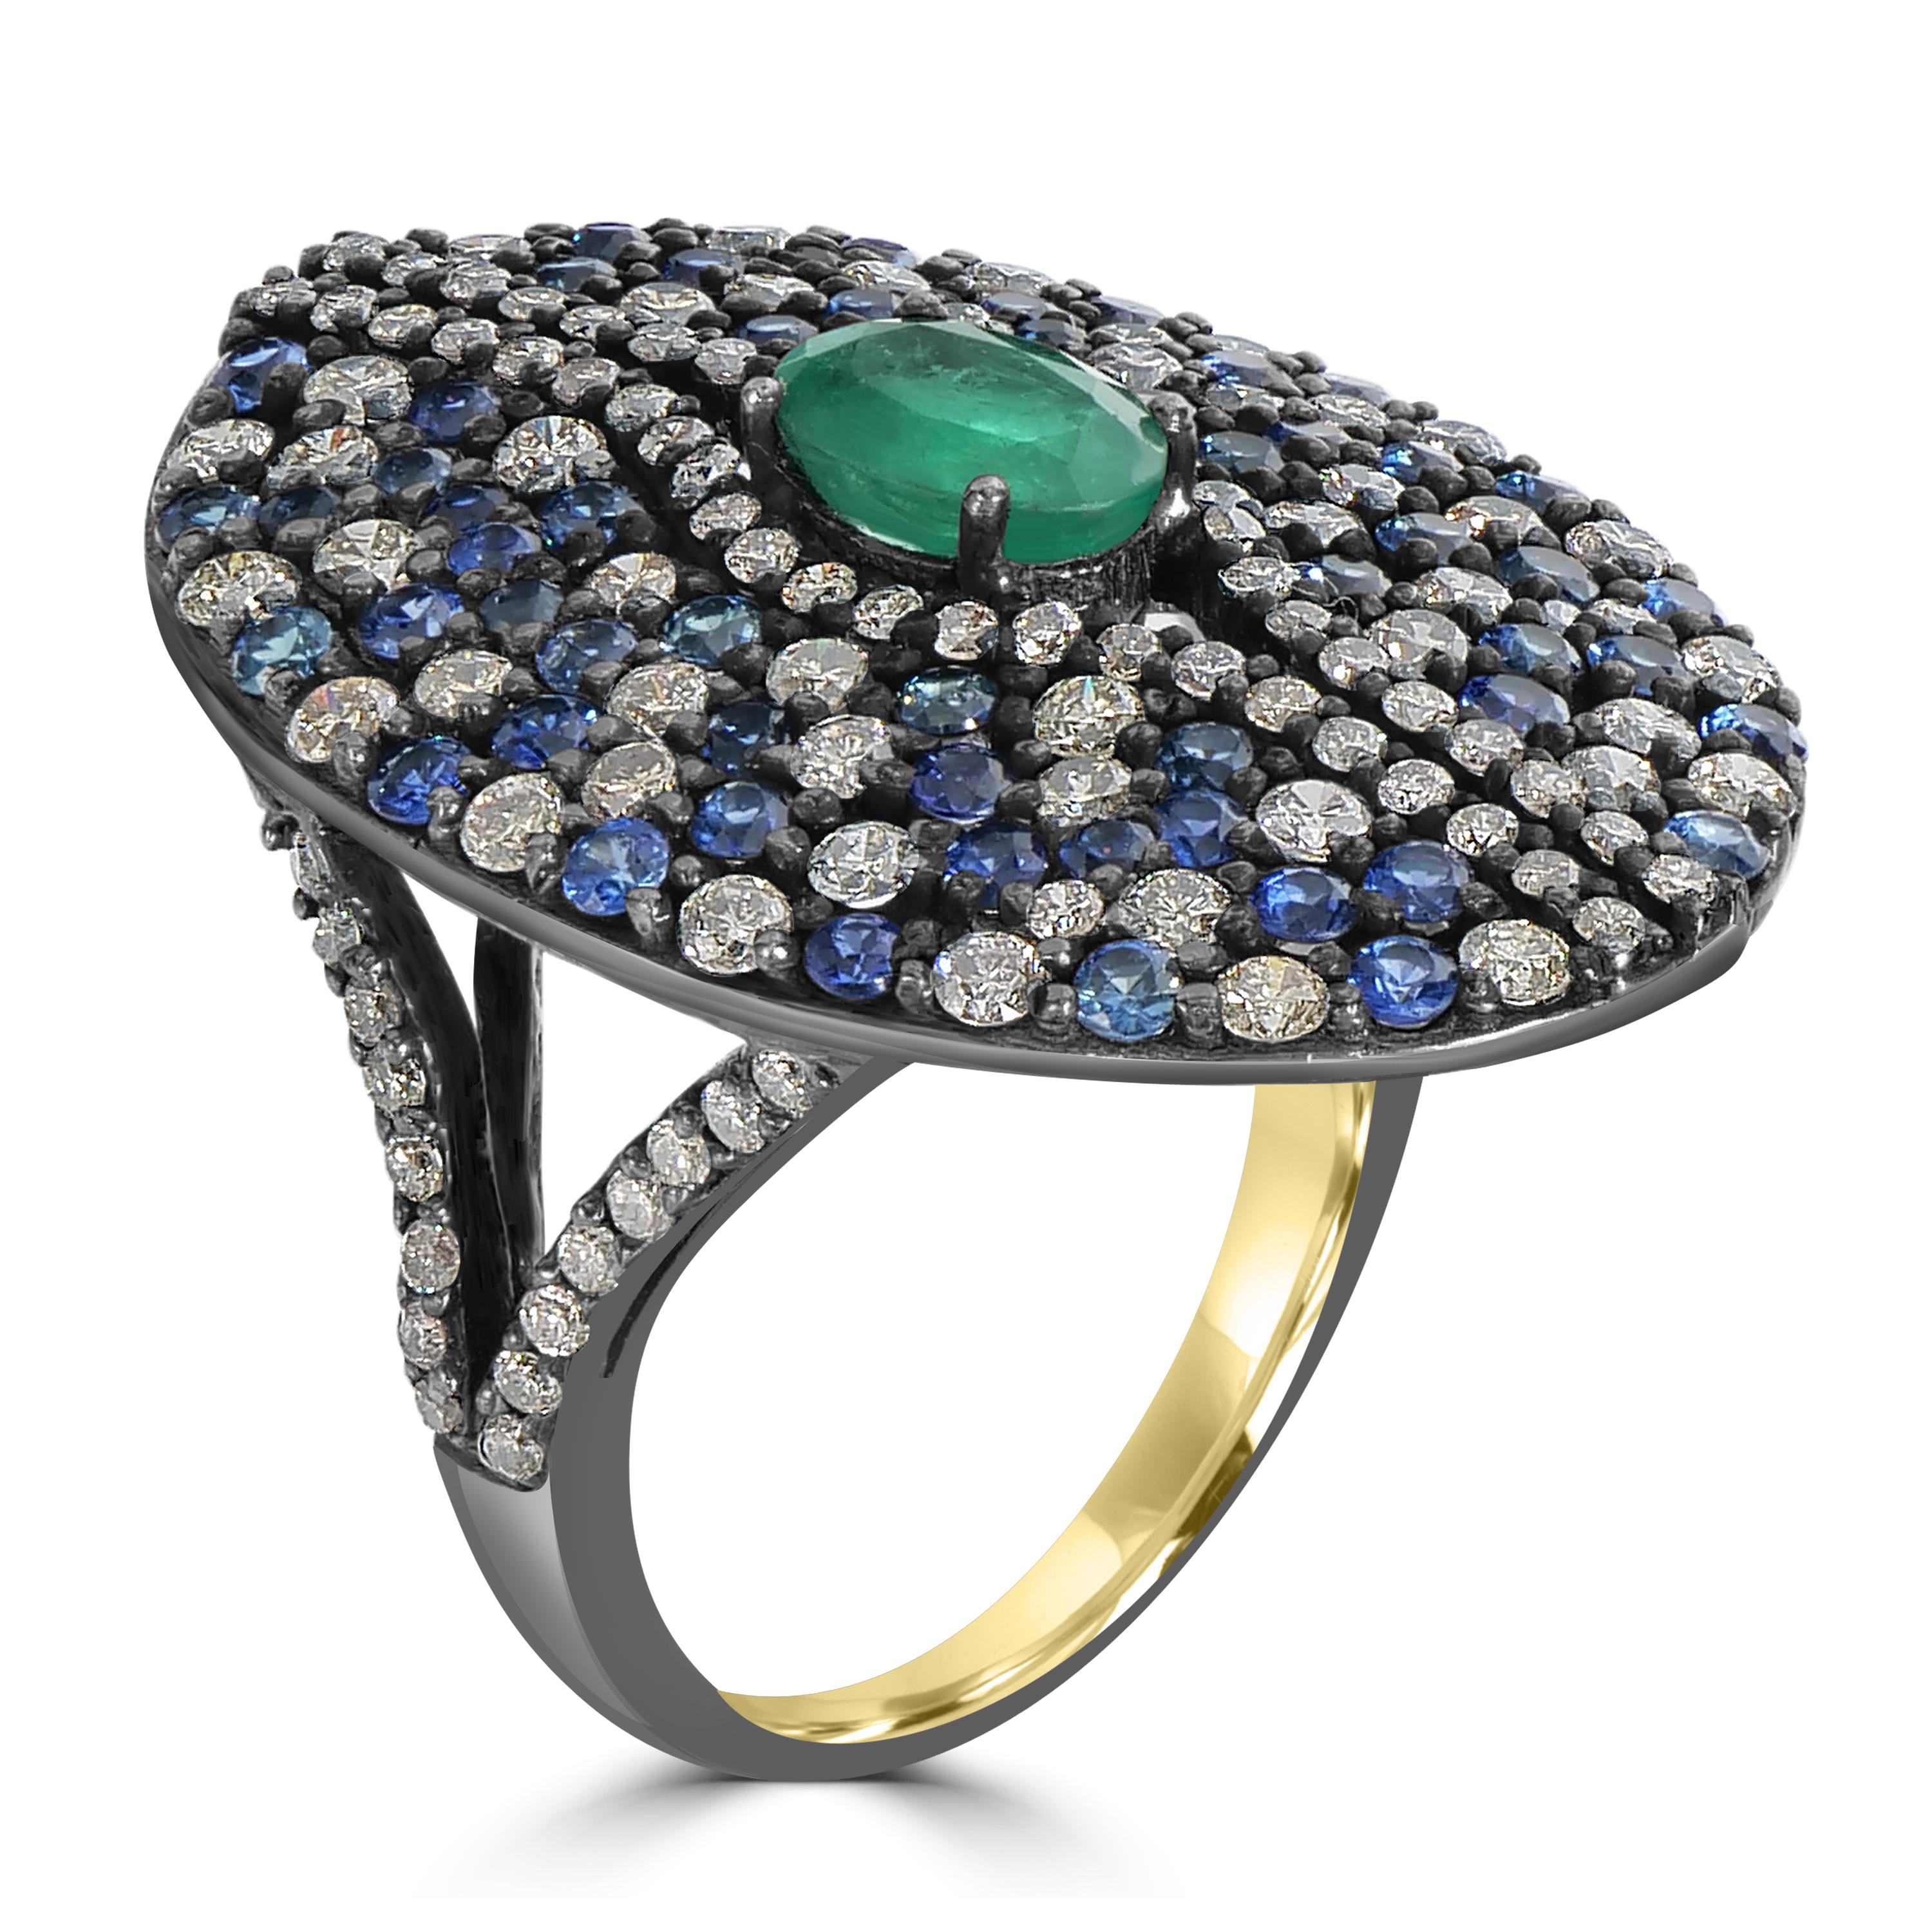 Step into the world of timeless elegance with the Victorian 4.3 Cttw. Emerald, Sapphire, and Diamond Split Shank Ring — a fusion of artistry and sophistication in 18k Gold and black rhodium silver. At its core, an oval emerald takes center stage, a